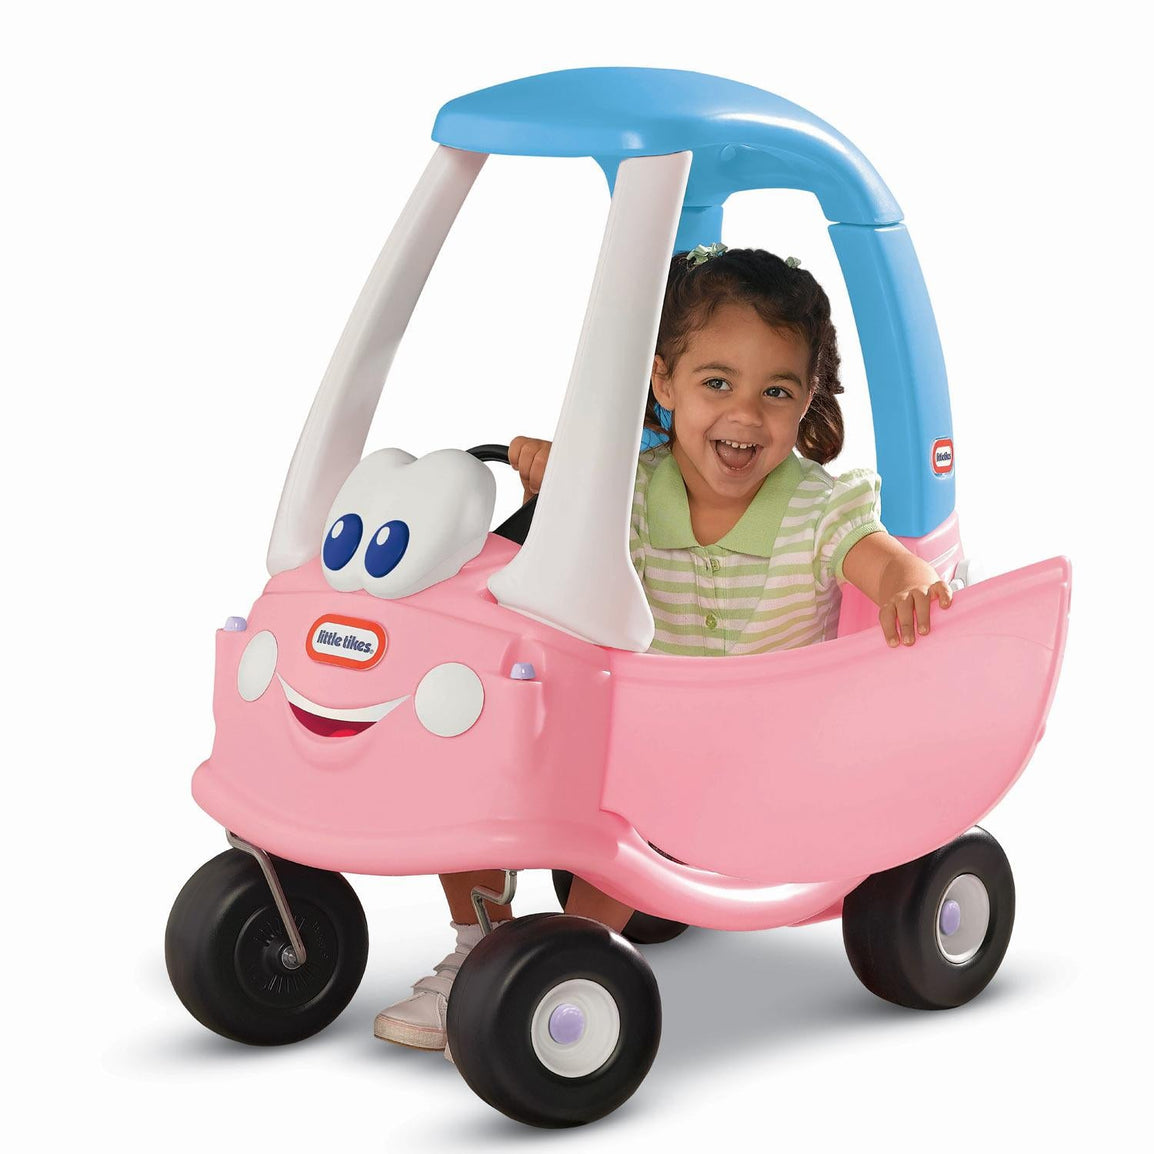 Little girls will beam behind the wheel of the Princess Cozy Coupe!